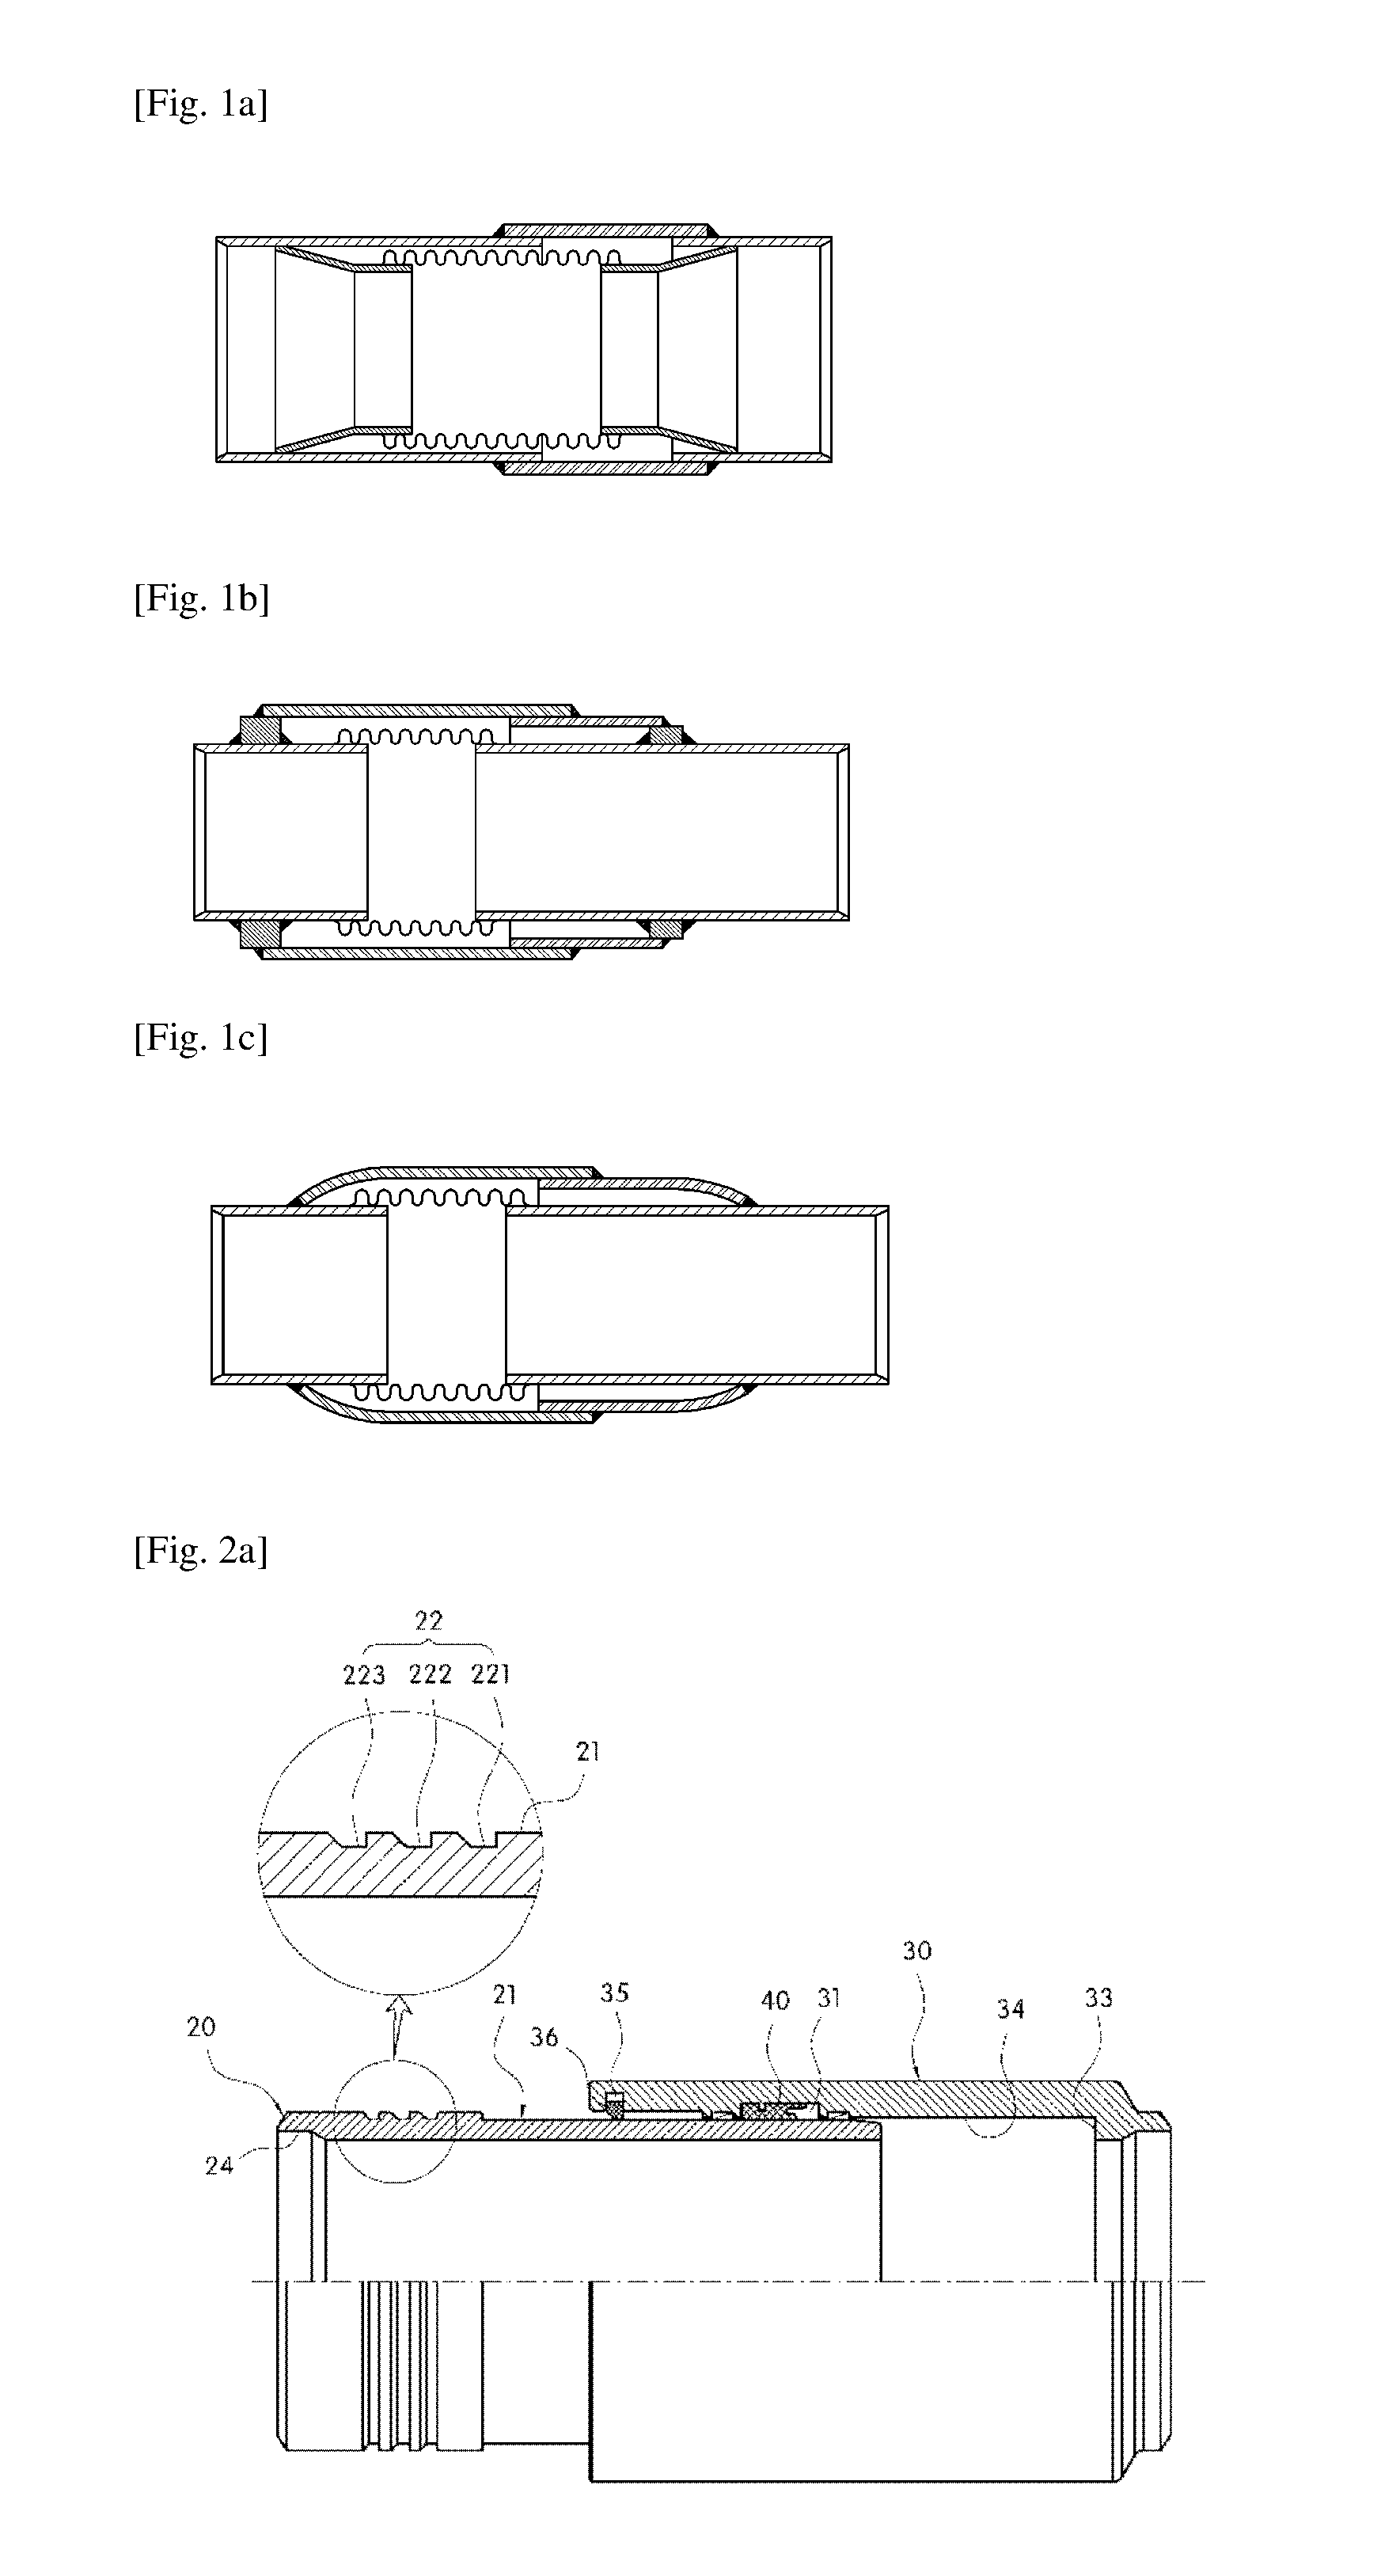 Expansion joint of underground piping having automatic locking stopper attached thereto